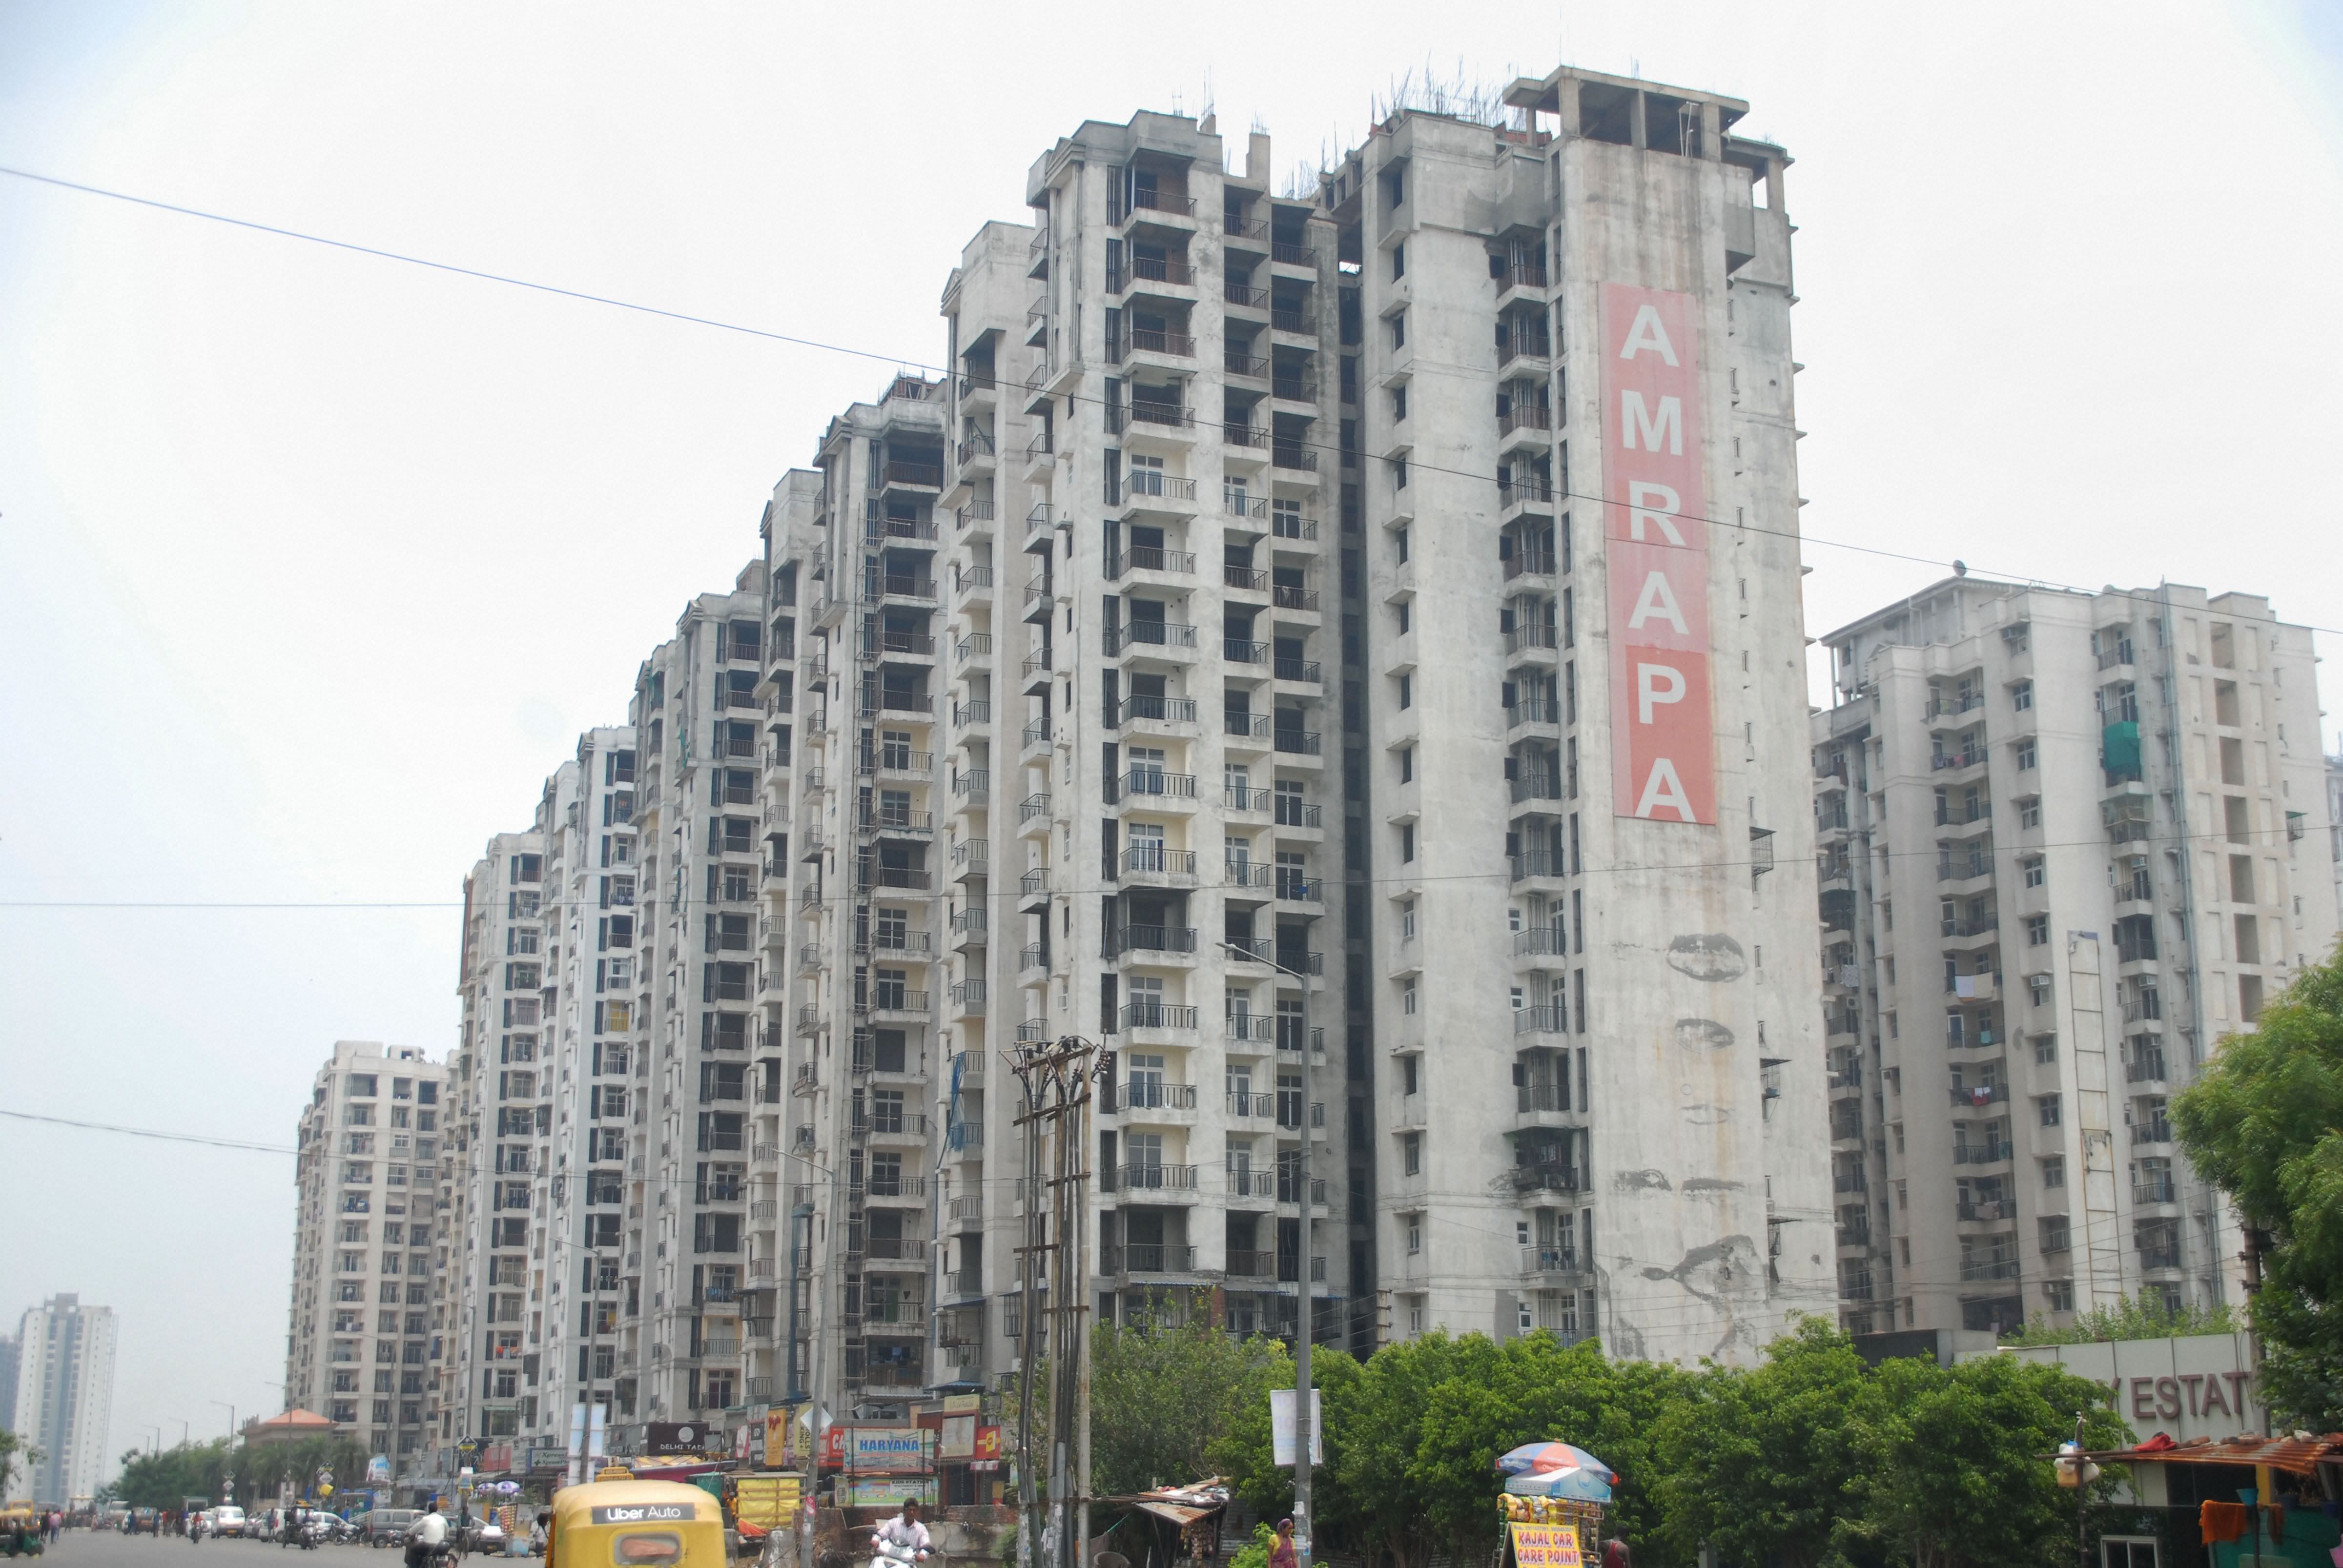  A view of the Amrapali buildings at sector 78, in Noida, Tuesday, July 23, 2019. The Supreme Court today cancelled the registration of the embattled Amrapali group under the Real Estate Regulatory Authority and the lease of its properties granted by Noida and Greater Noida authorities. (PTI Photo)